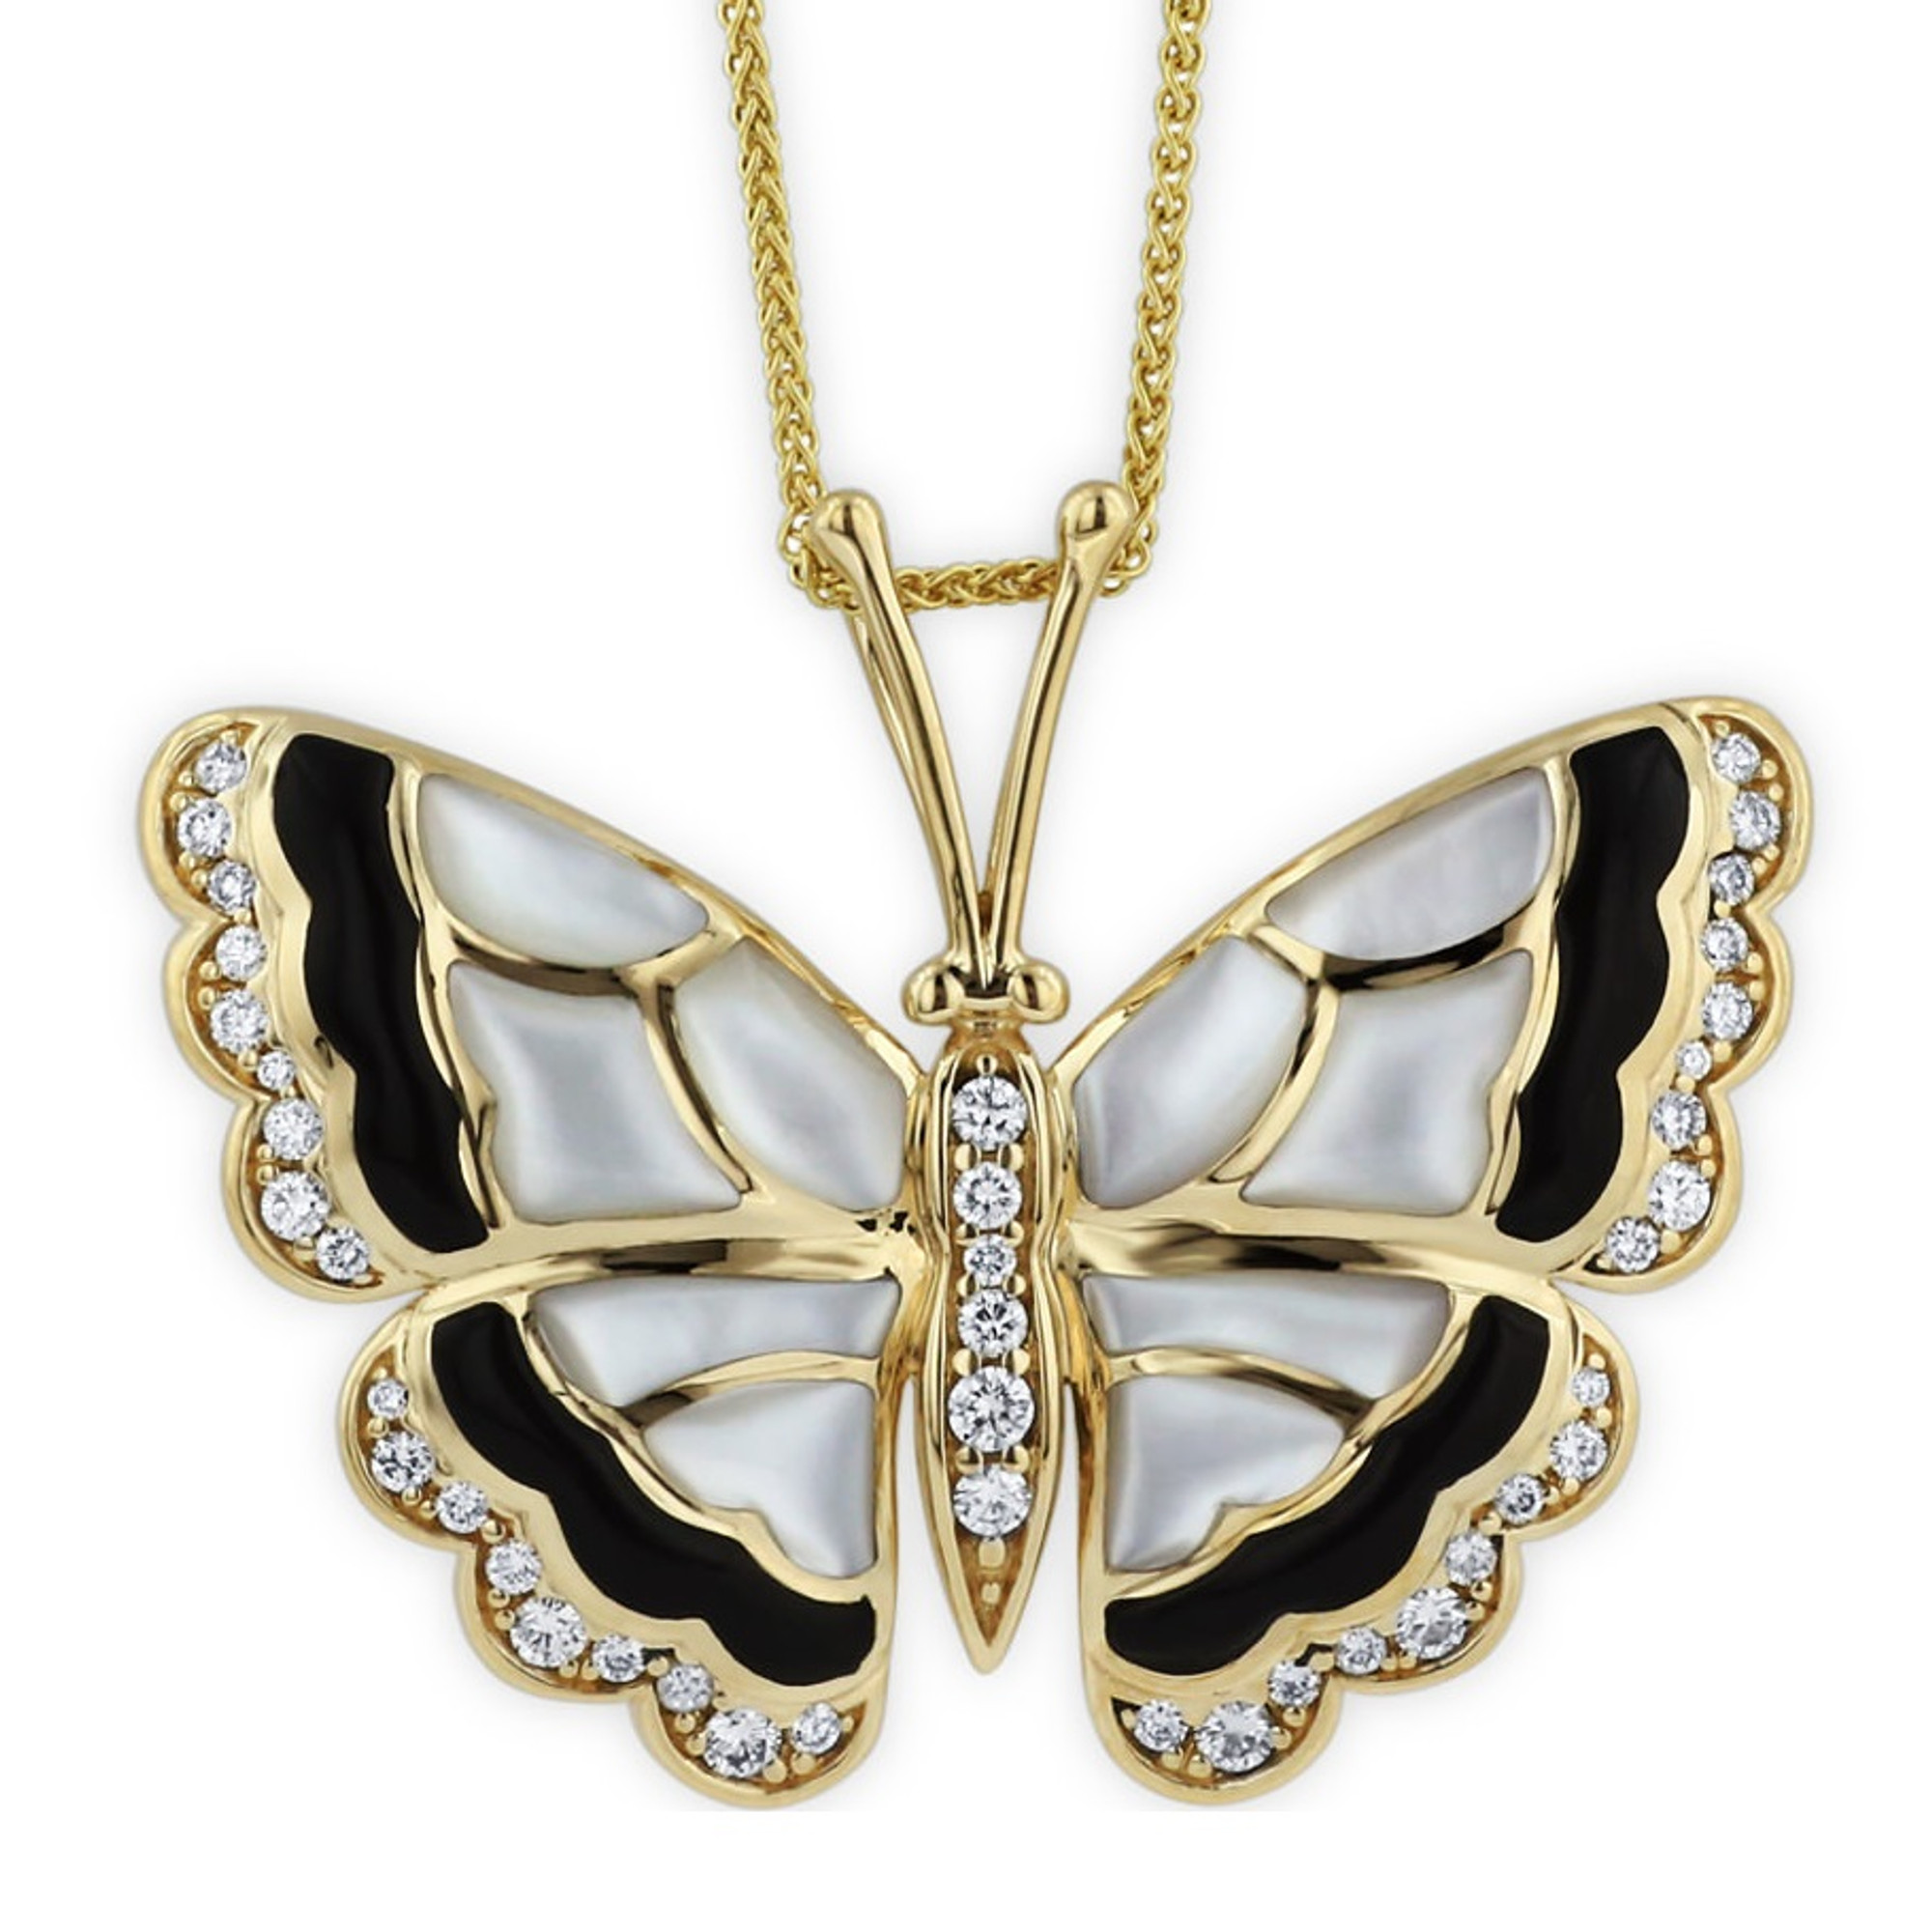 Buy LA BELLEZA Gold Plated Sleek Pearl Butterfly Pendant with Chain Necklace  Neckpiece for Girls and Women (In 4 Color) (Black) at Amazon.in